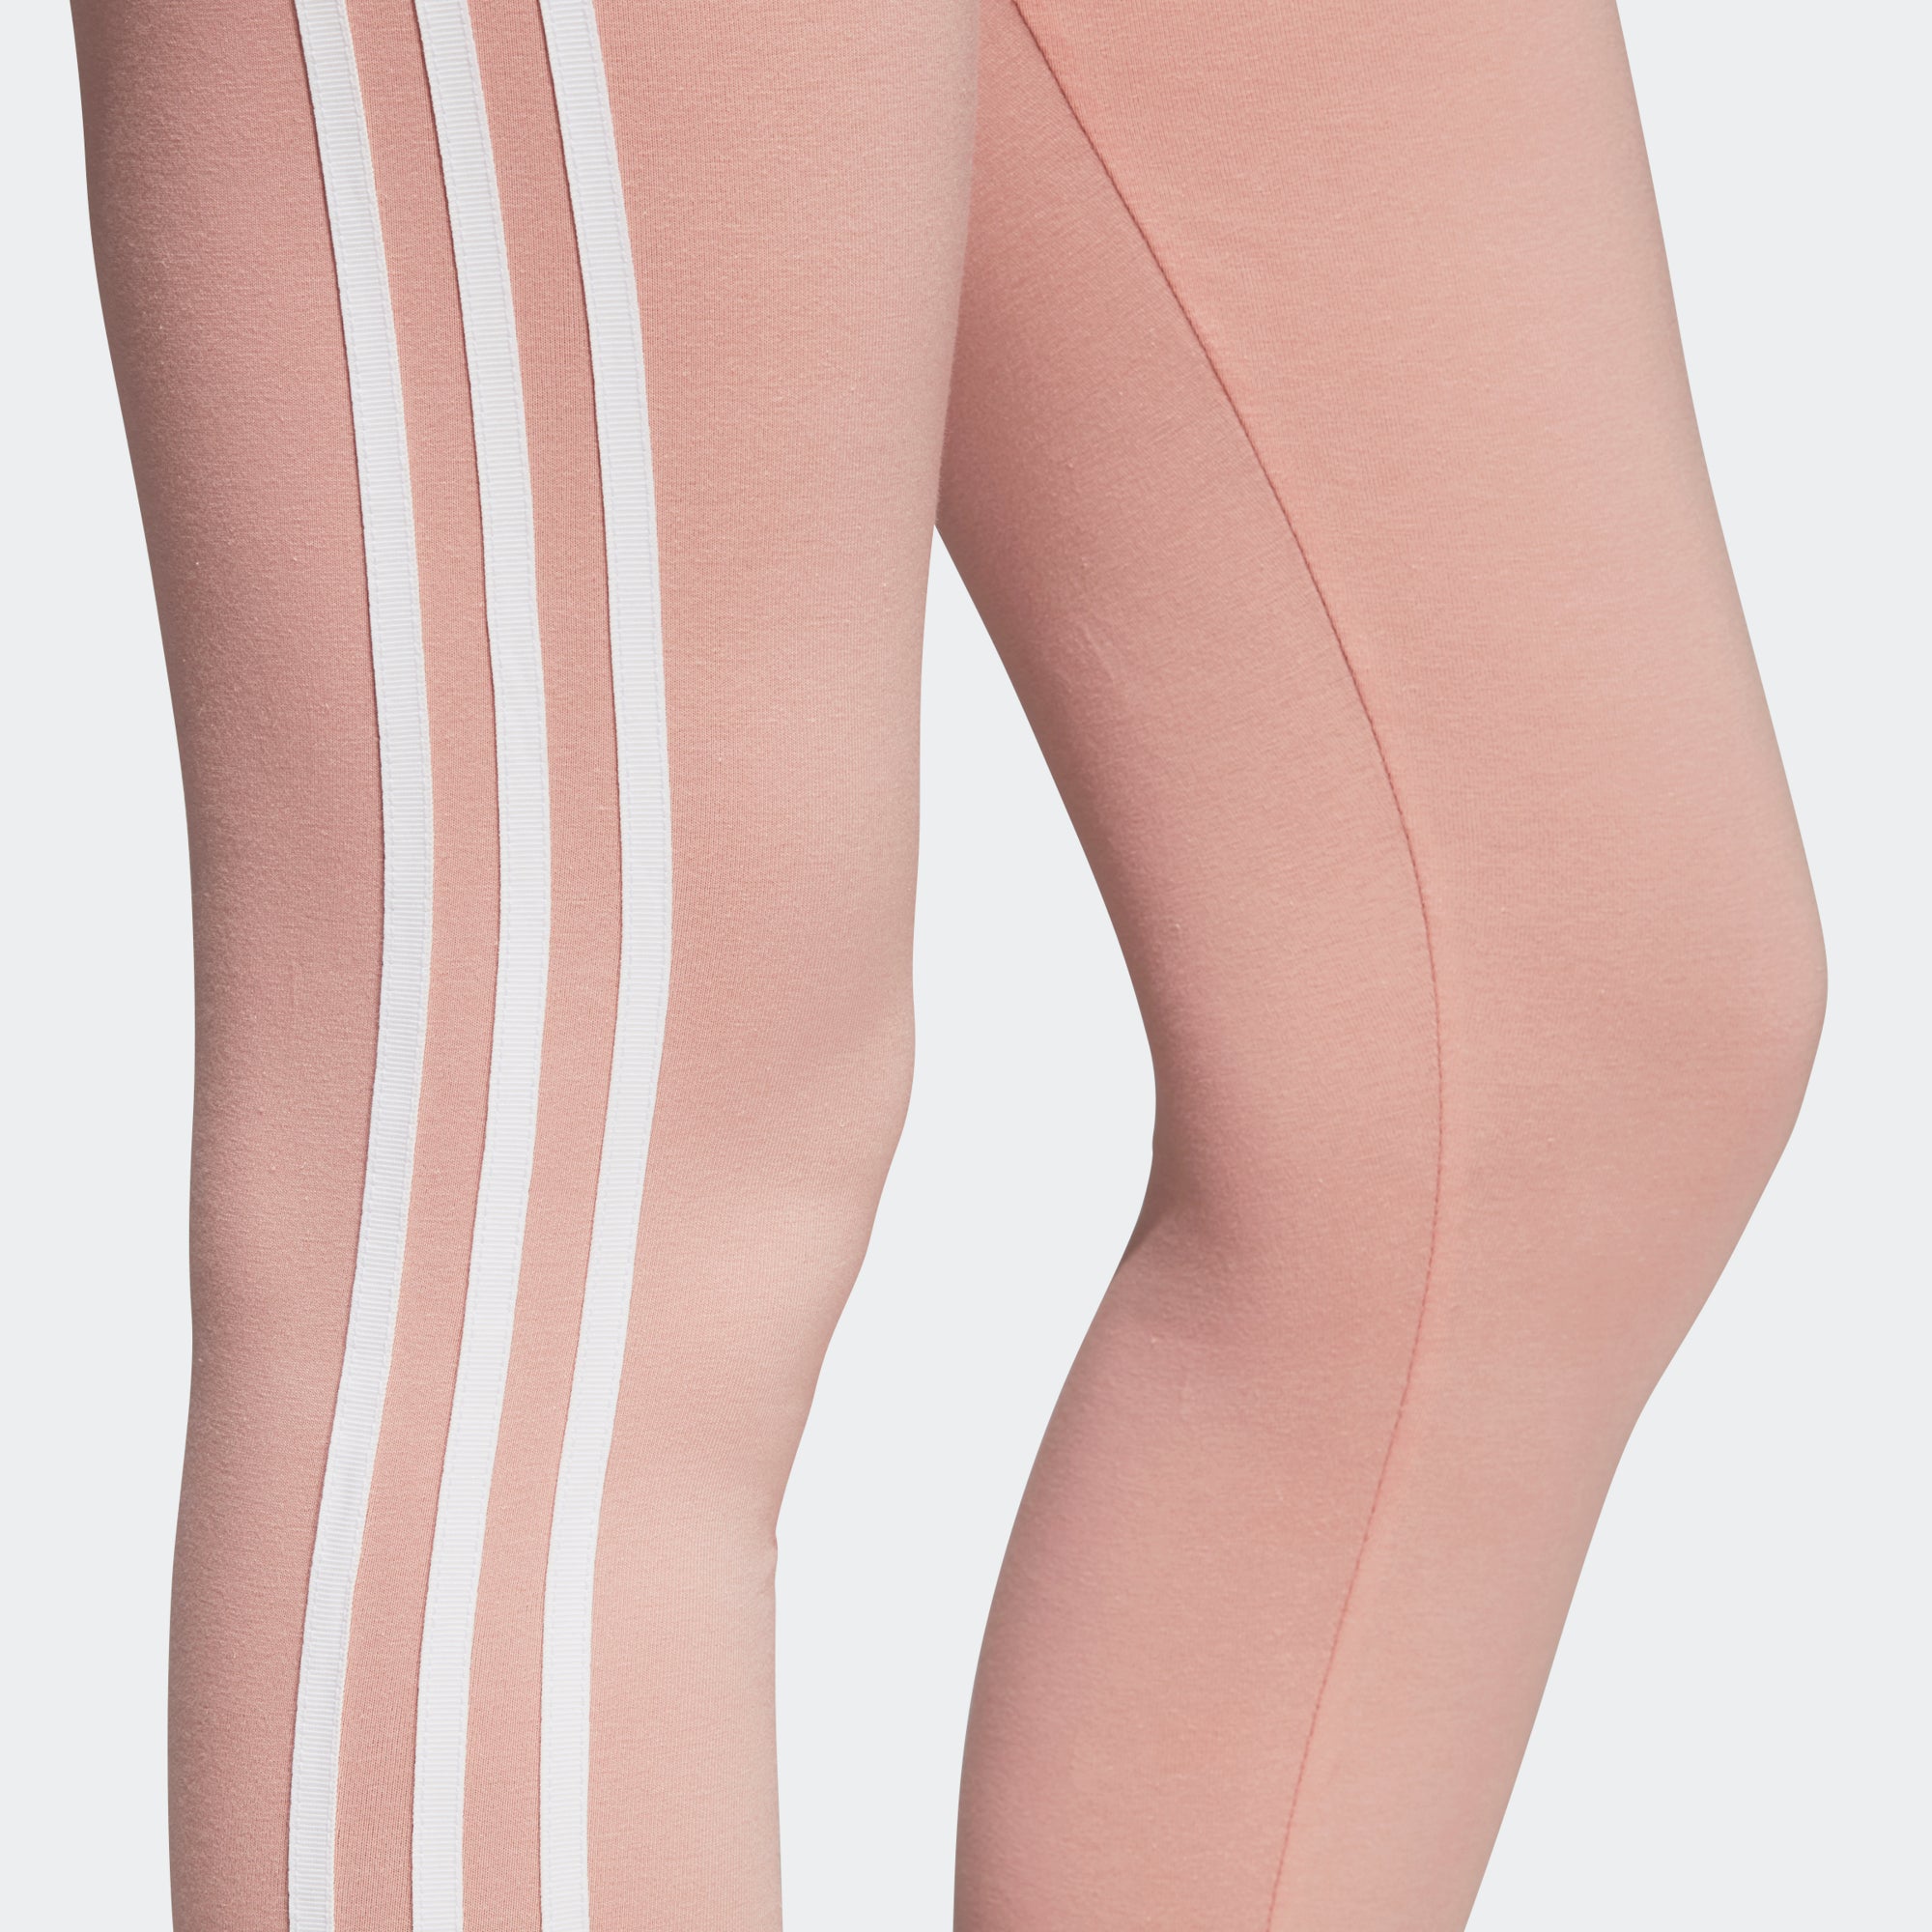 adidas leggings with pink stripes